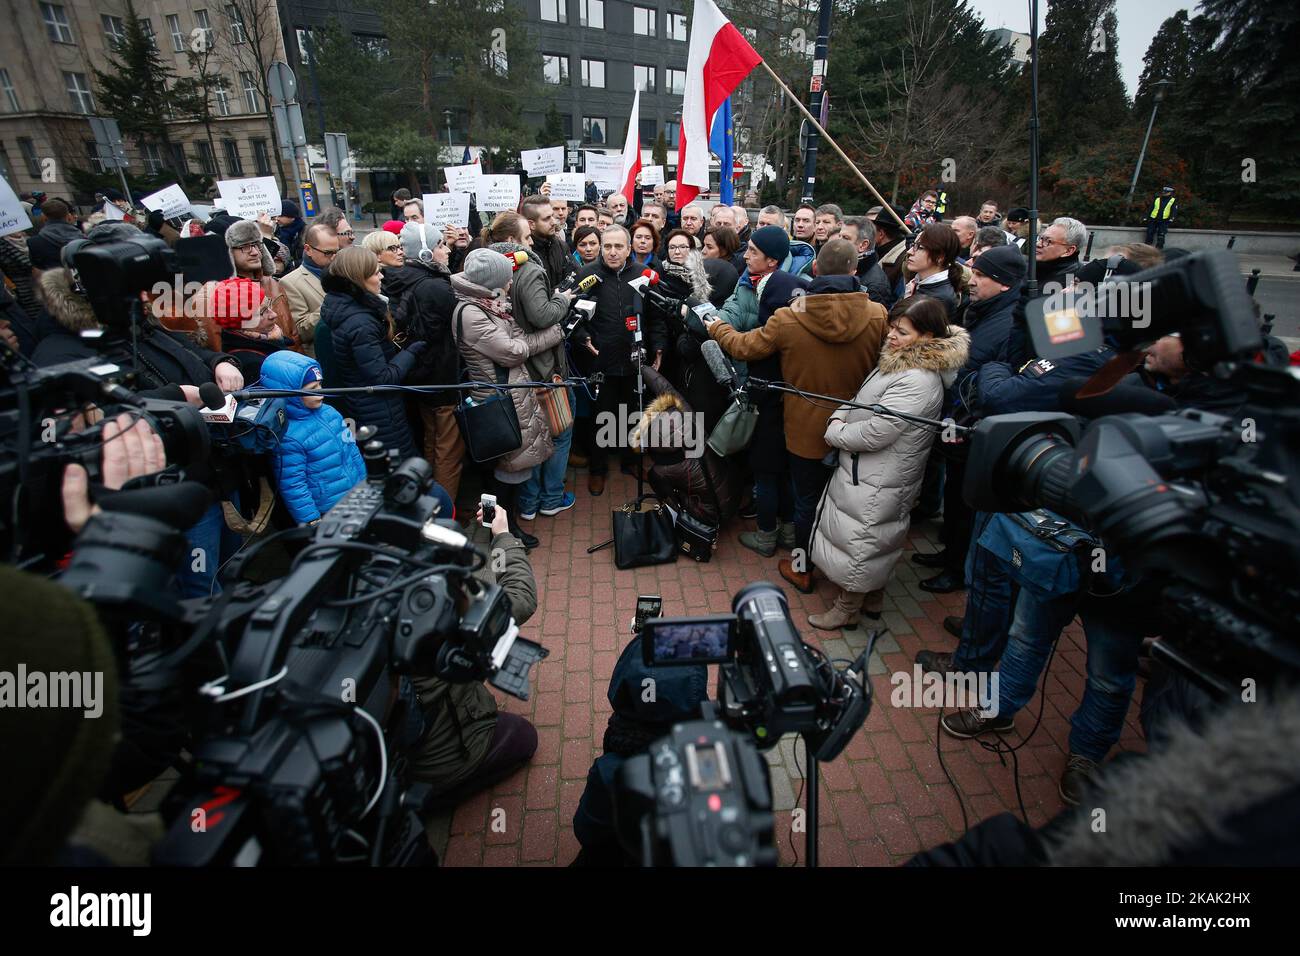 Members of the oppostion hold a short press conference outside parliament over the situation inside in Bydgoszcz, Poland on December 17, 2016. People stand outside the entrance of the Sejm, the Polish parliament after liberal lawmakers blocked a conservative budget proposal which included limiting access to free information and further limits on media access to politicians. The current events amount to the most serious political crisis the country has seen in its 27 years as a democratic republic. (Photo by Jaap Arriens/NurPhoto) *** Please Use Credit from Credit Field *** Stock Photo